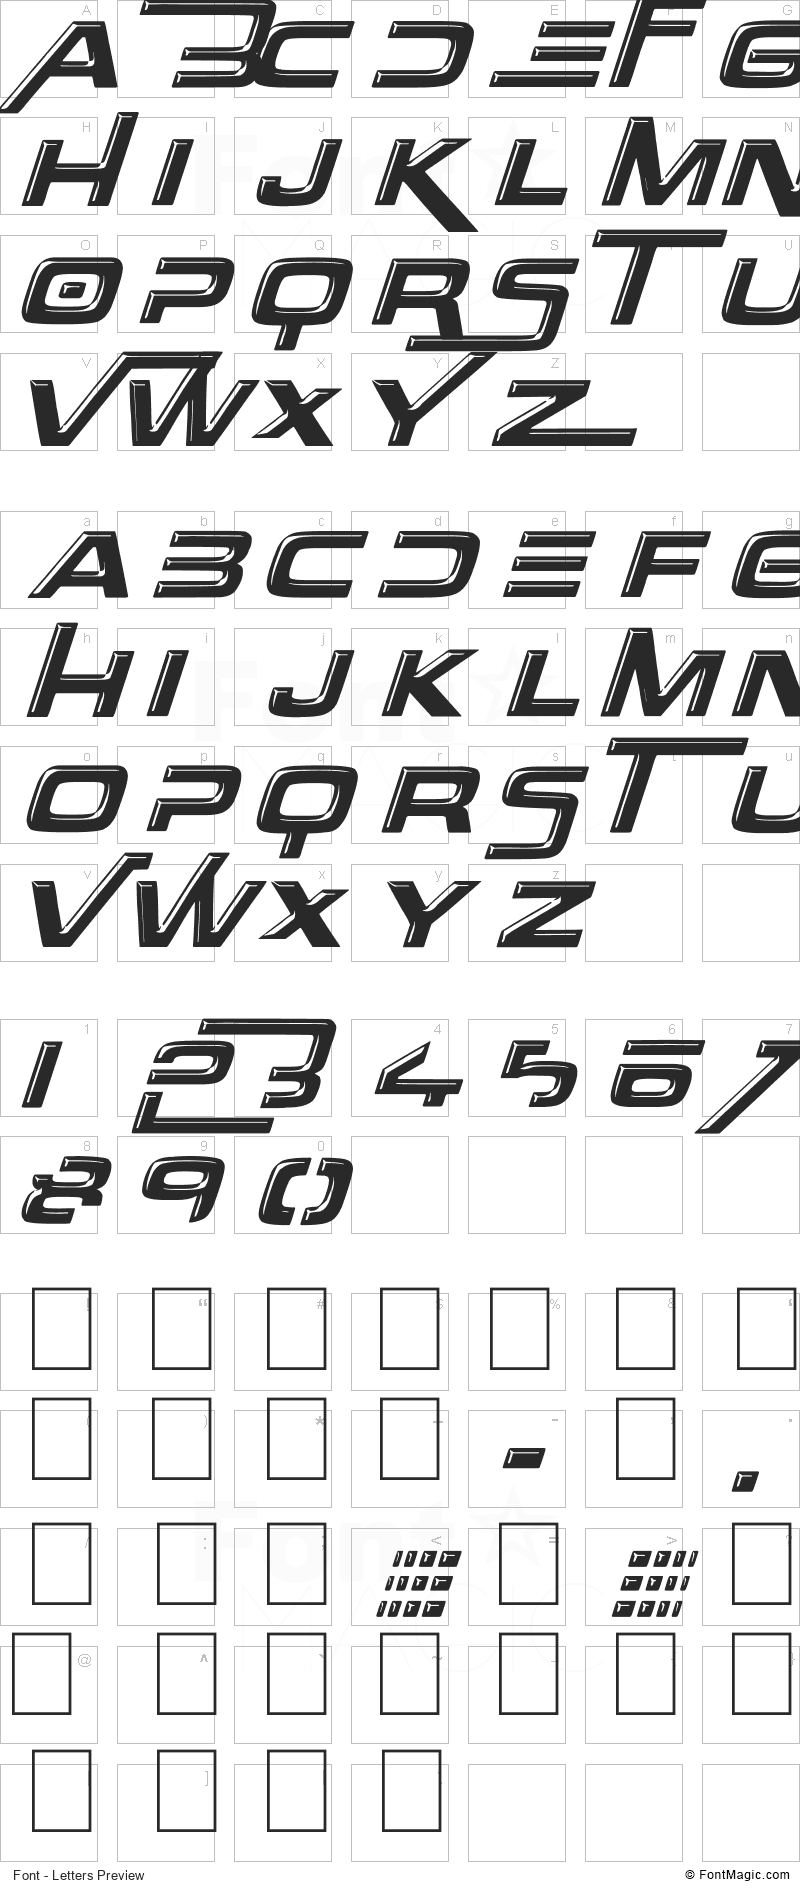 Over There Font - All Latters Preview Chart